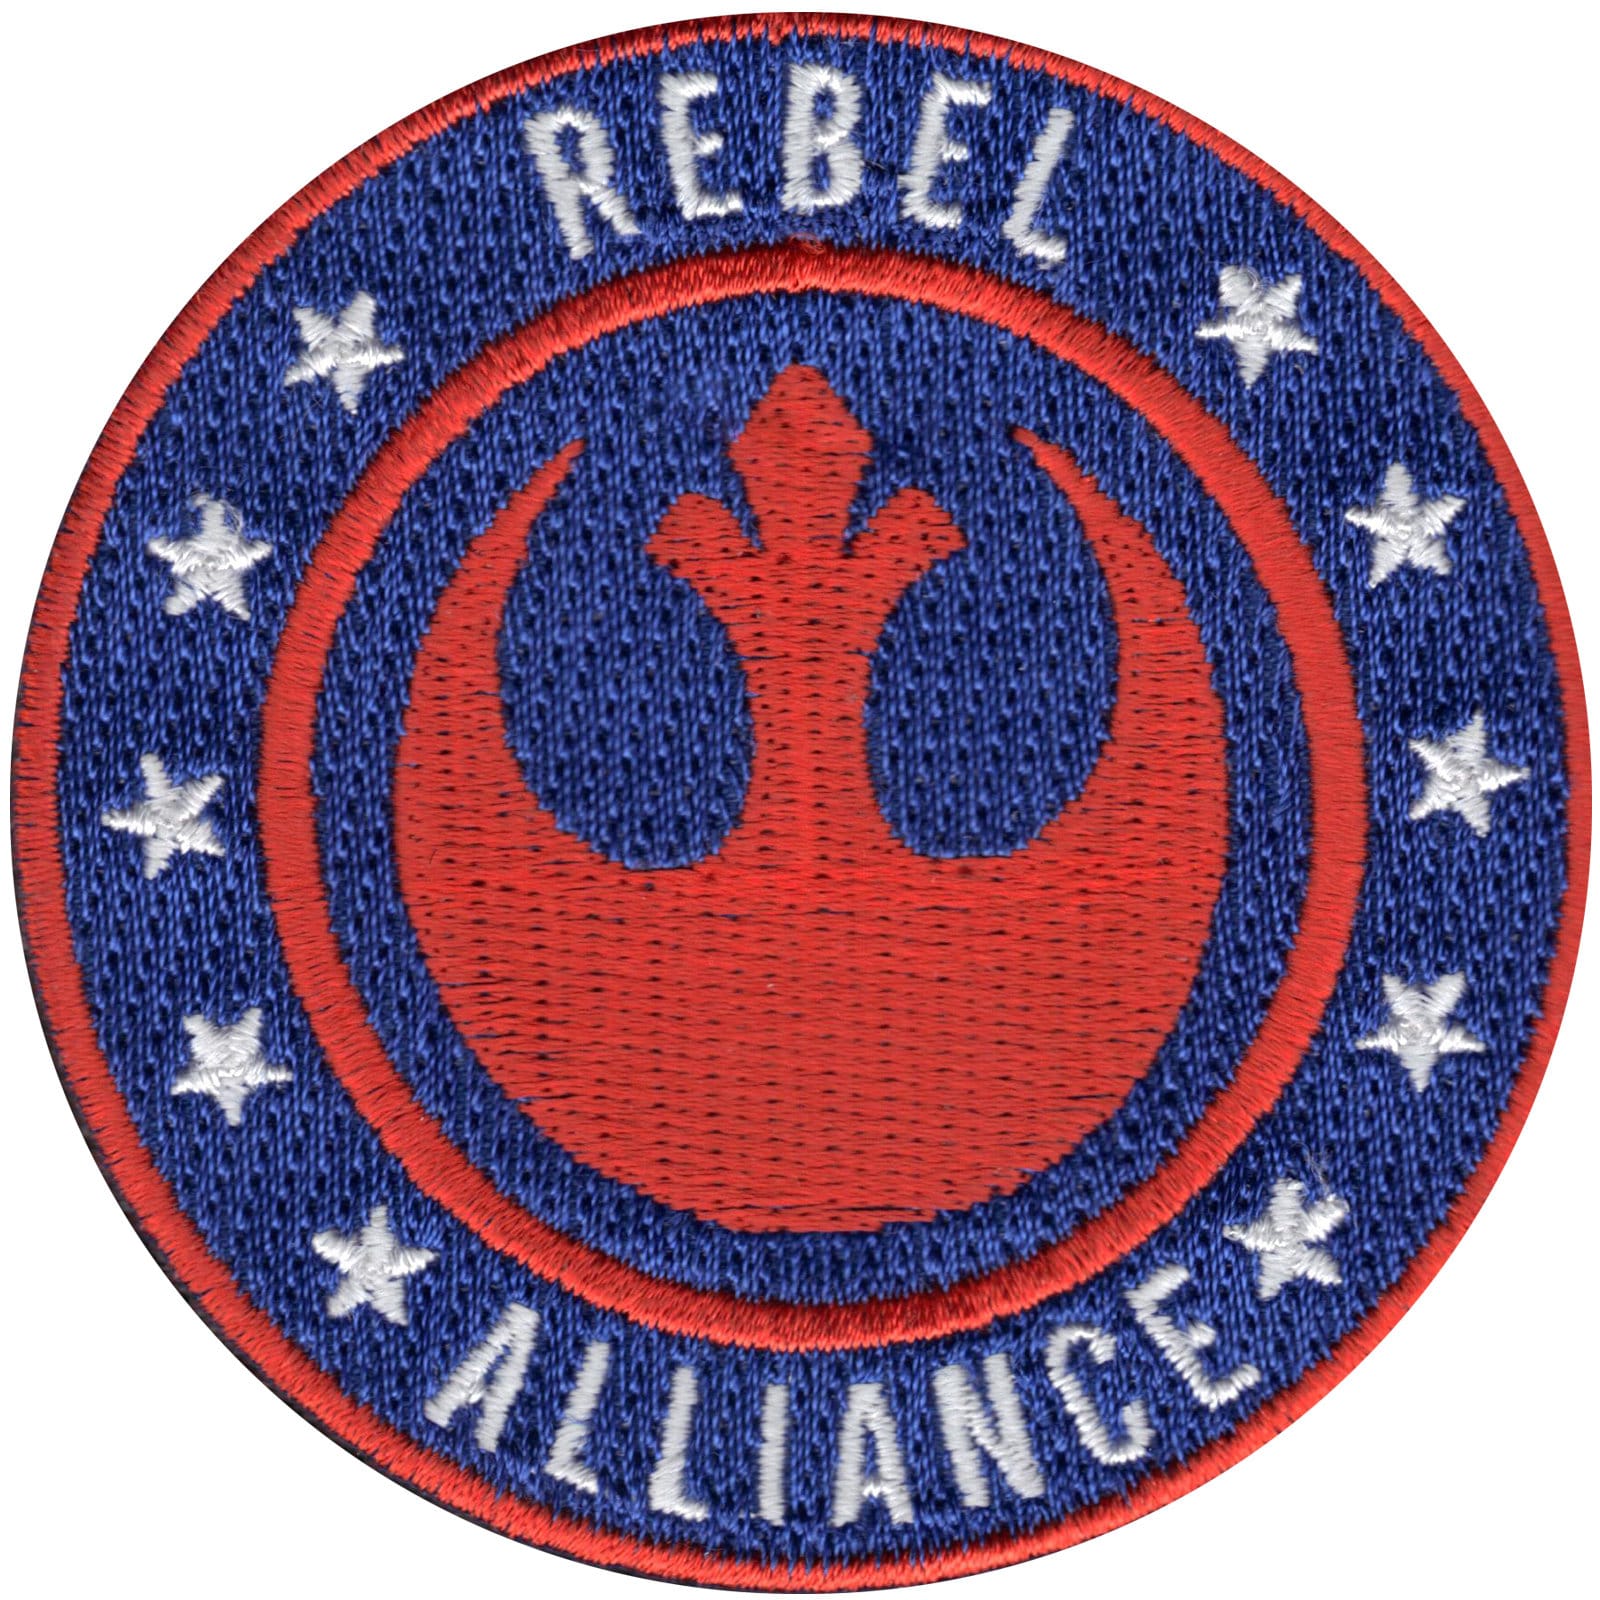 Star Wars Rebel Insignia Logo Mini Embroidered Patch 1.5 inch 